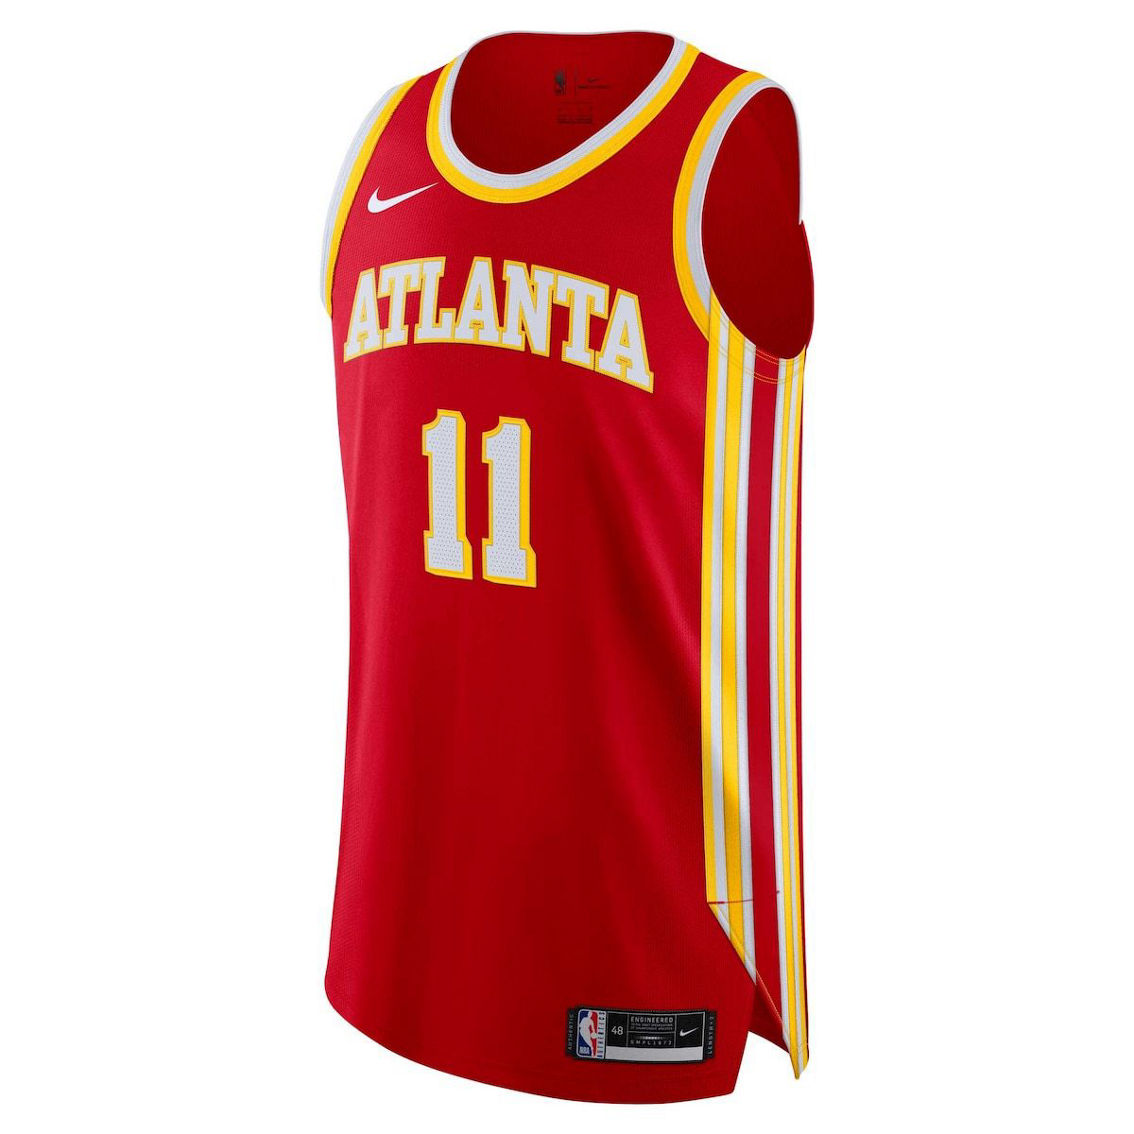 Nike Men's Trae Young Red Atlanta Hawks Authentic Jersey - Icon Edition - Image 3 of 4